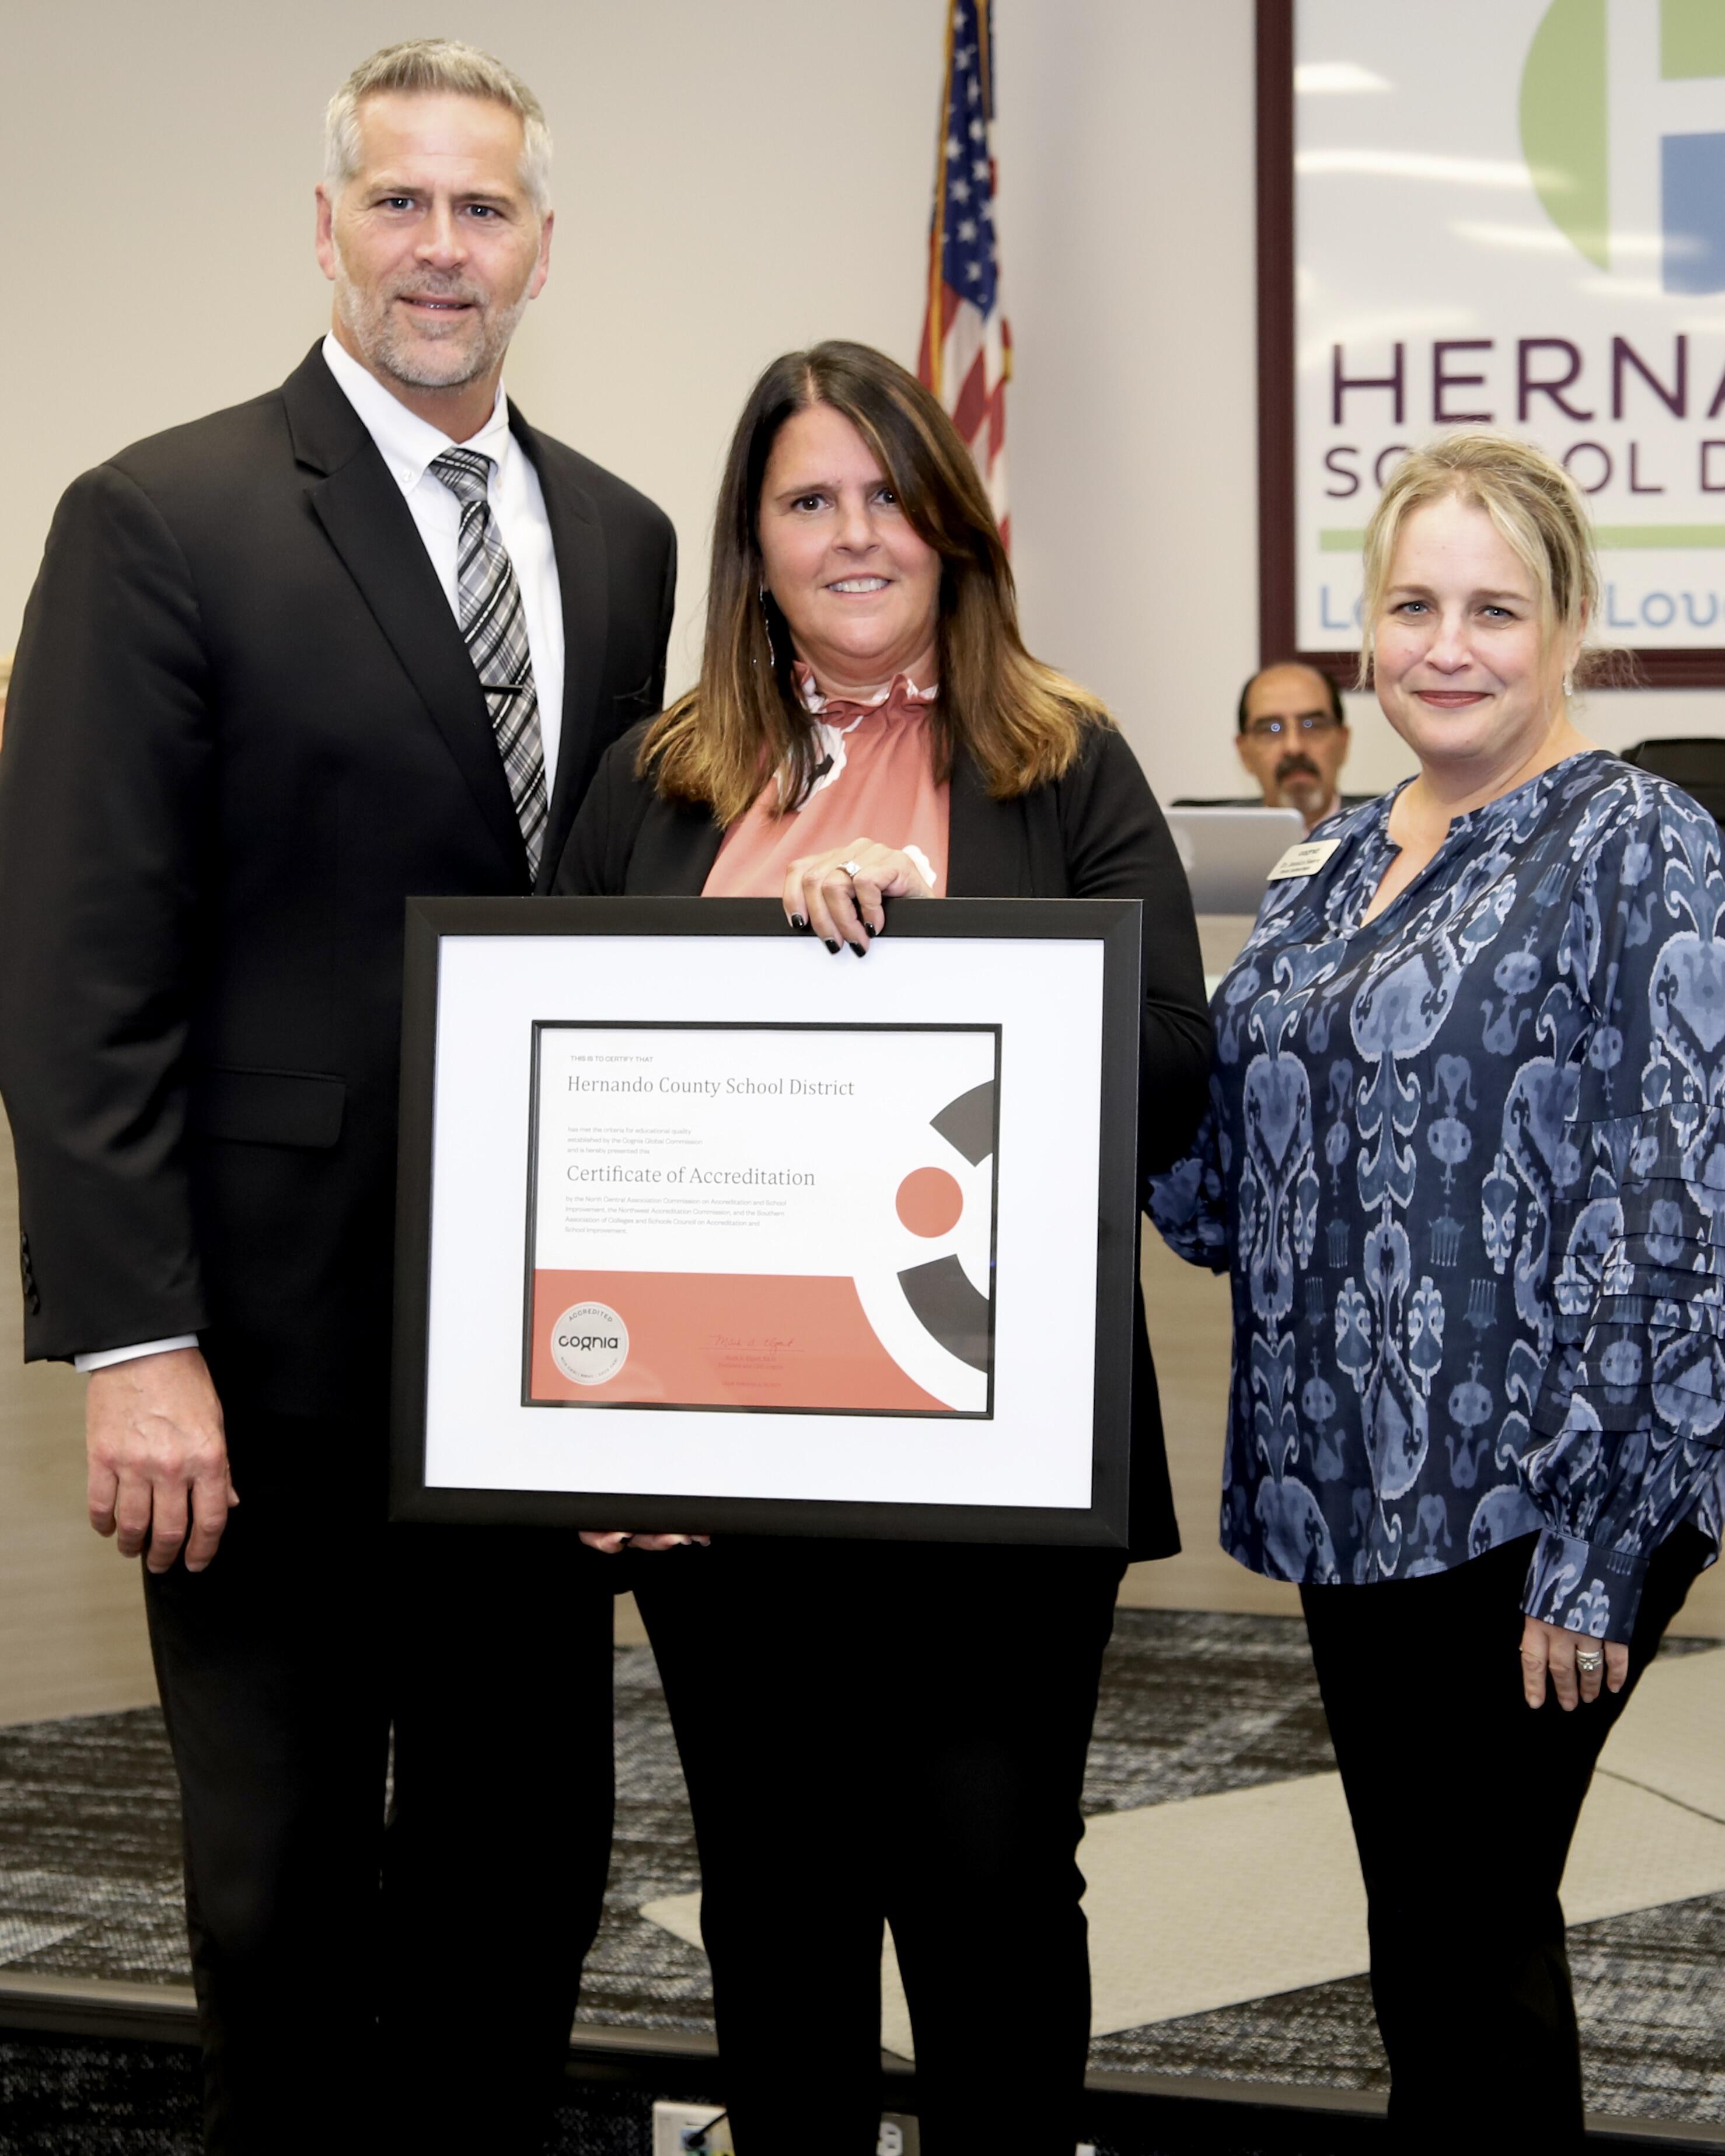 Dr. Jessica Swere presents accreditation certificate to Superintendent and Assistant Superintendent